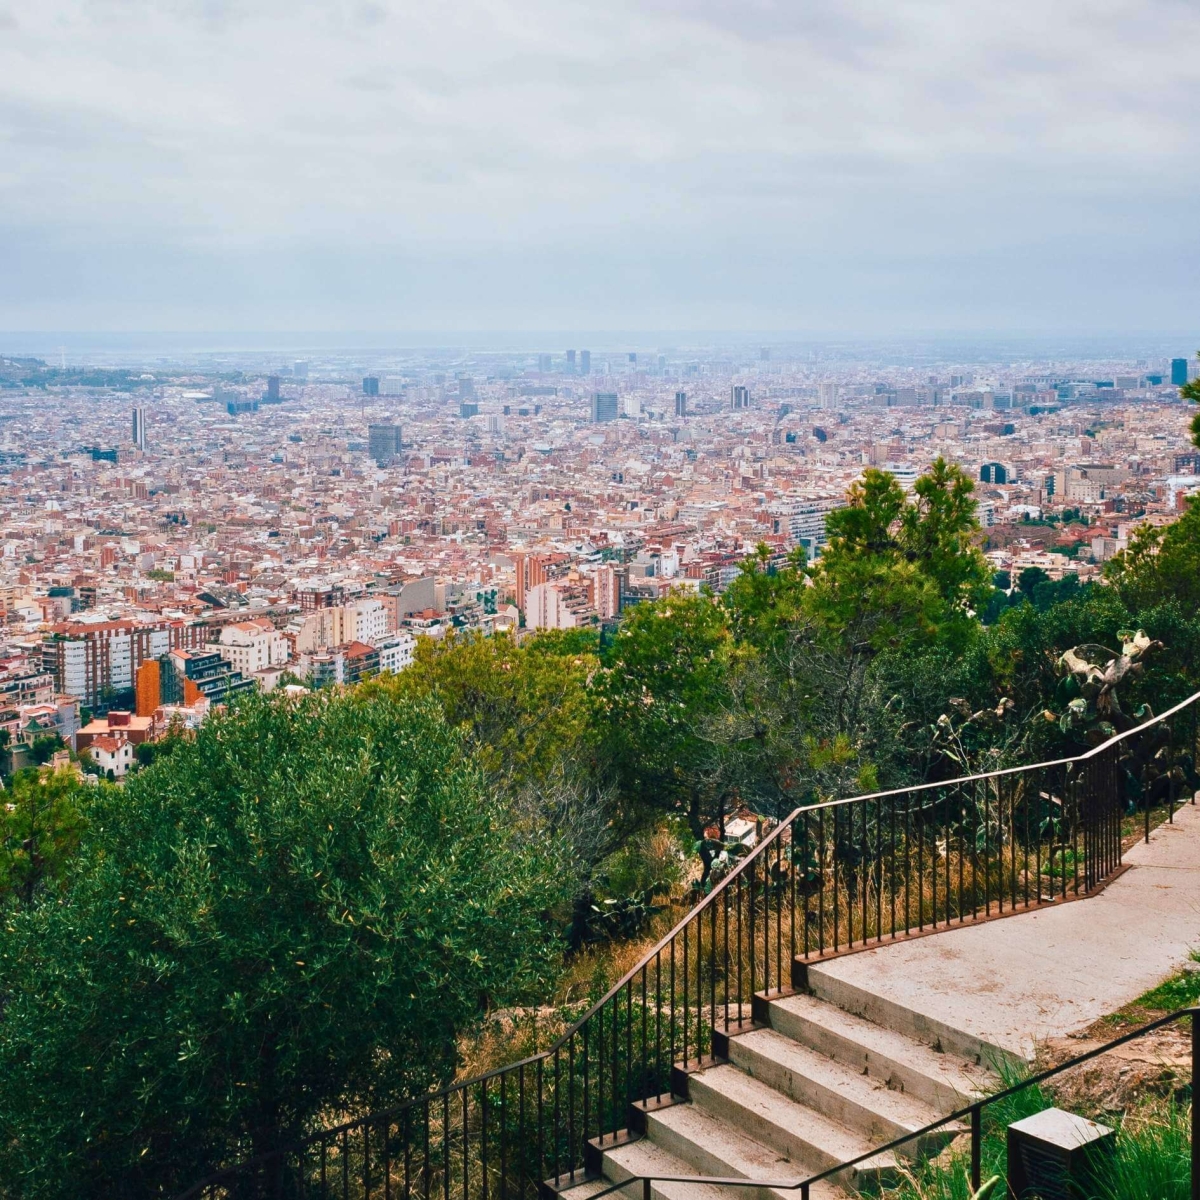 Areial view of Barcelona from Bunquers del Carmel, Spain